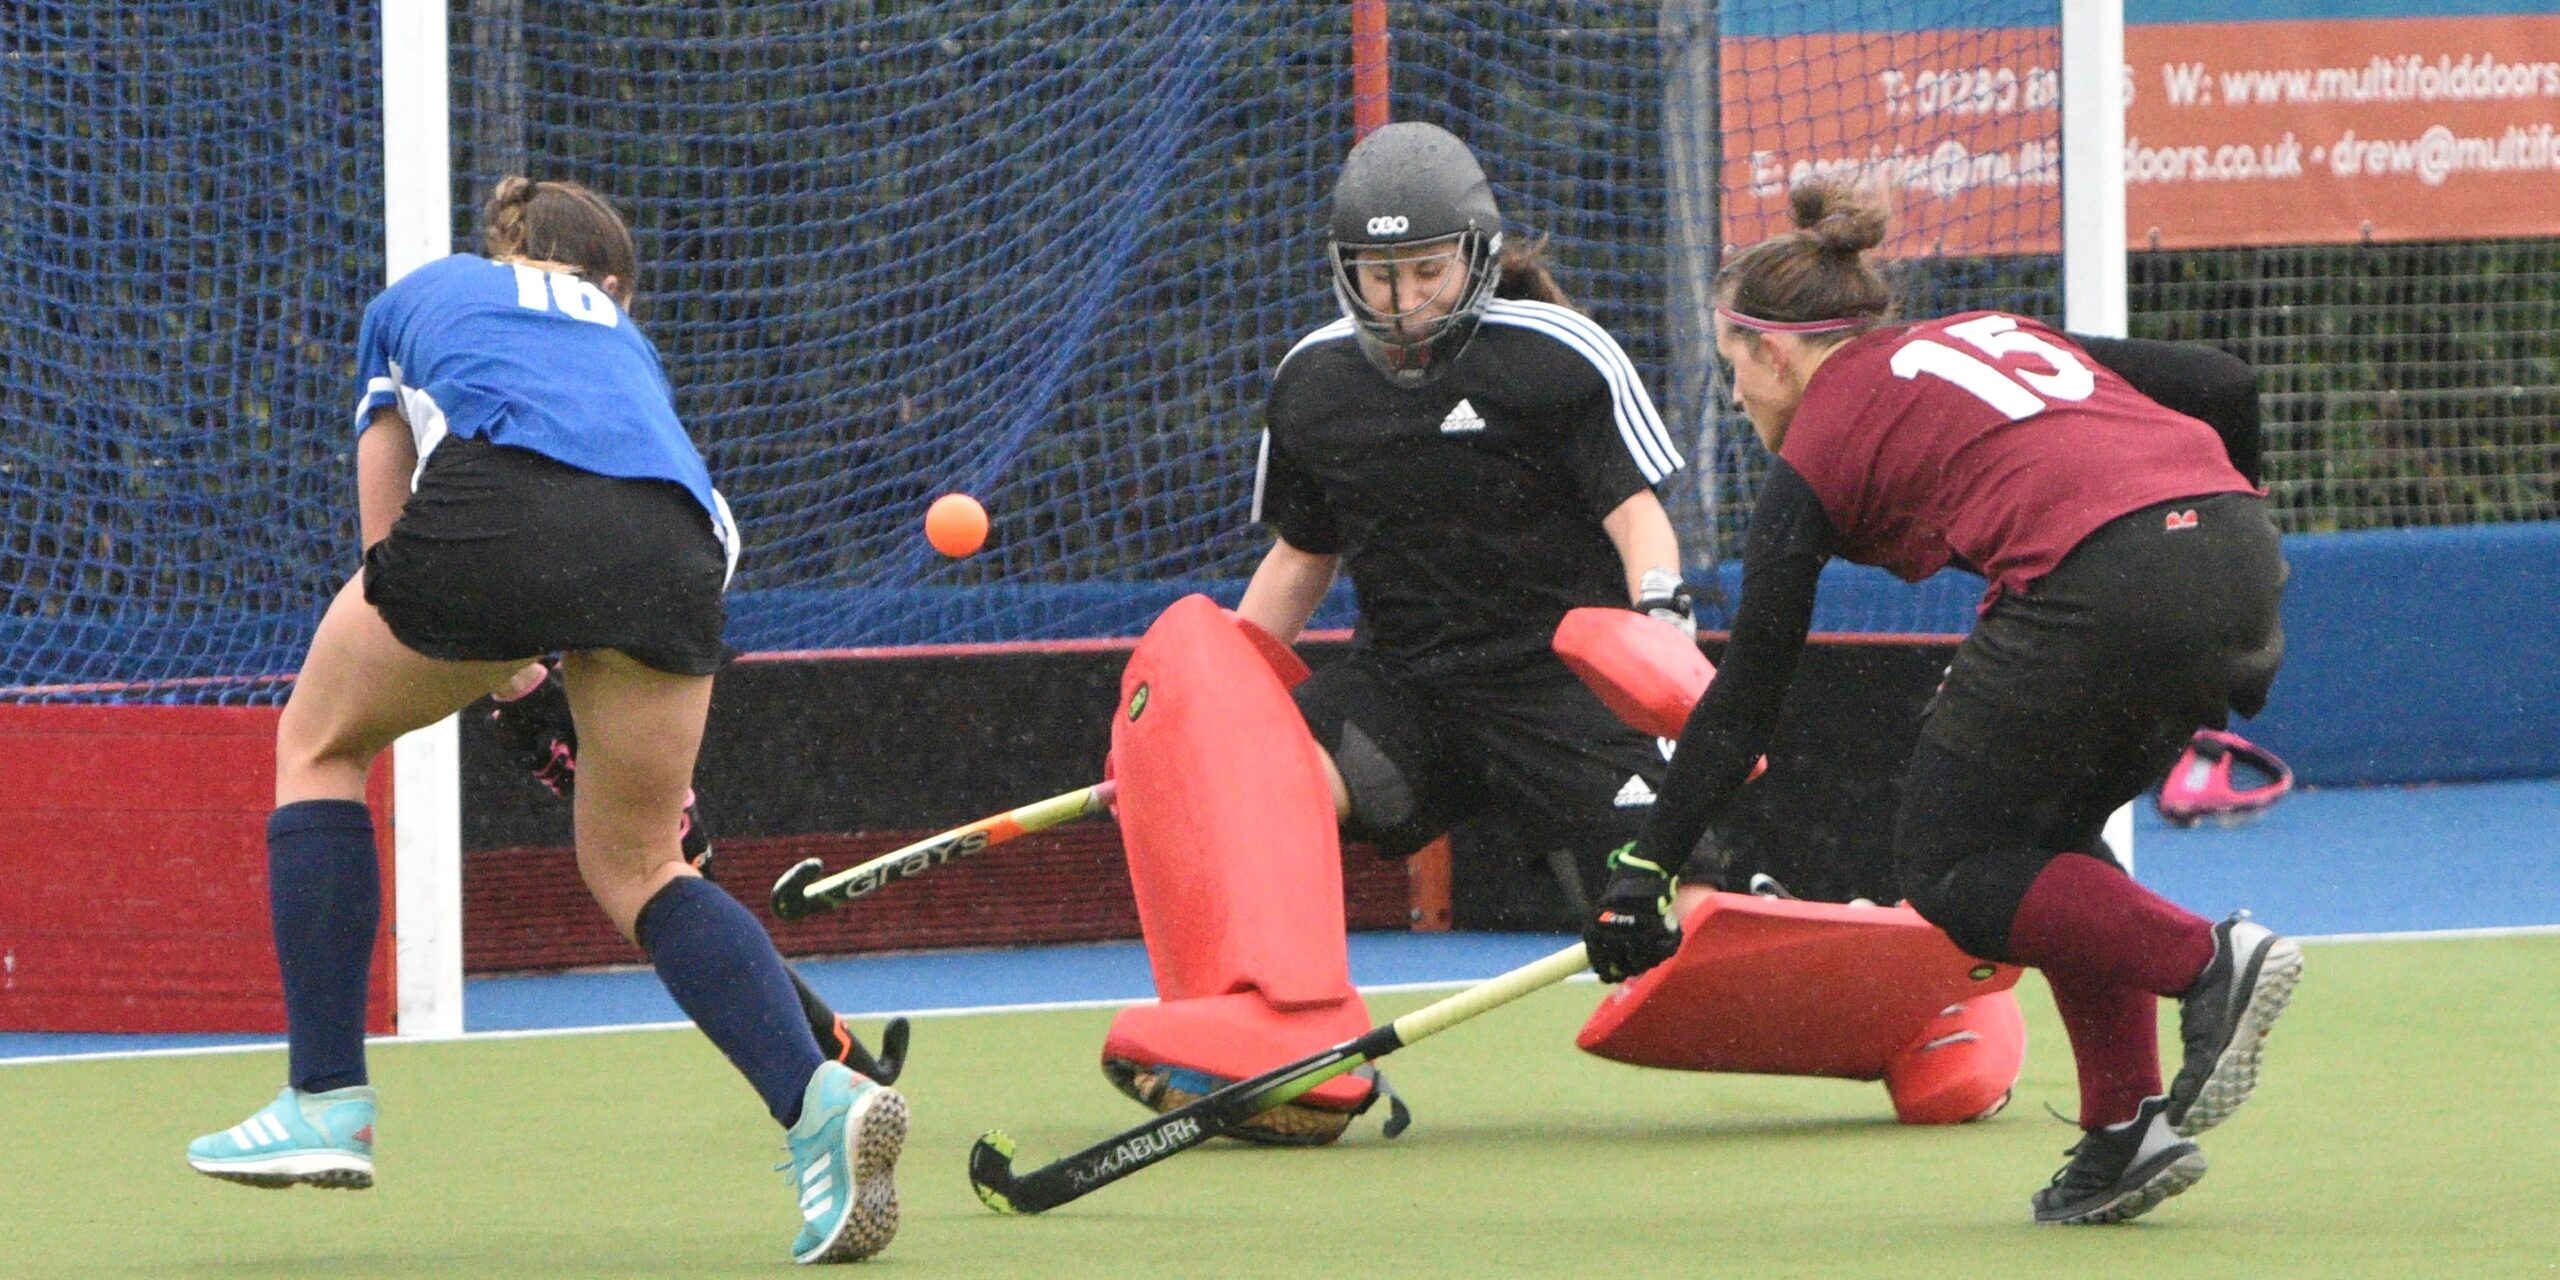 Home Derby win for Ladies’ 2s!